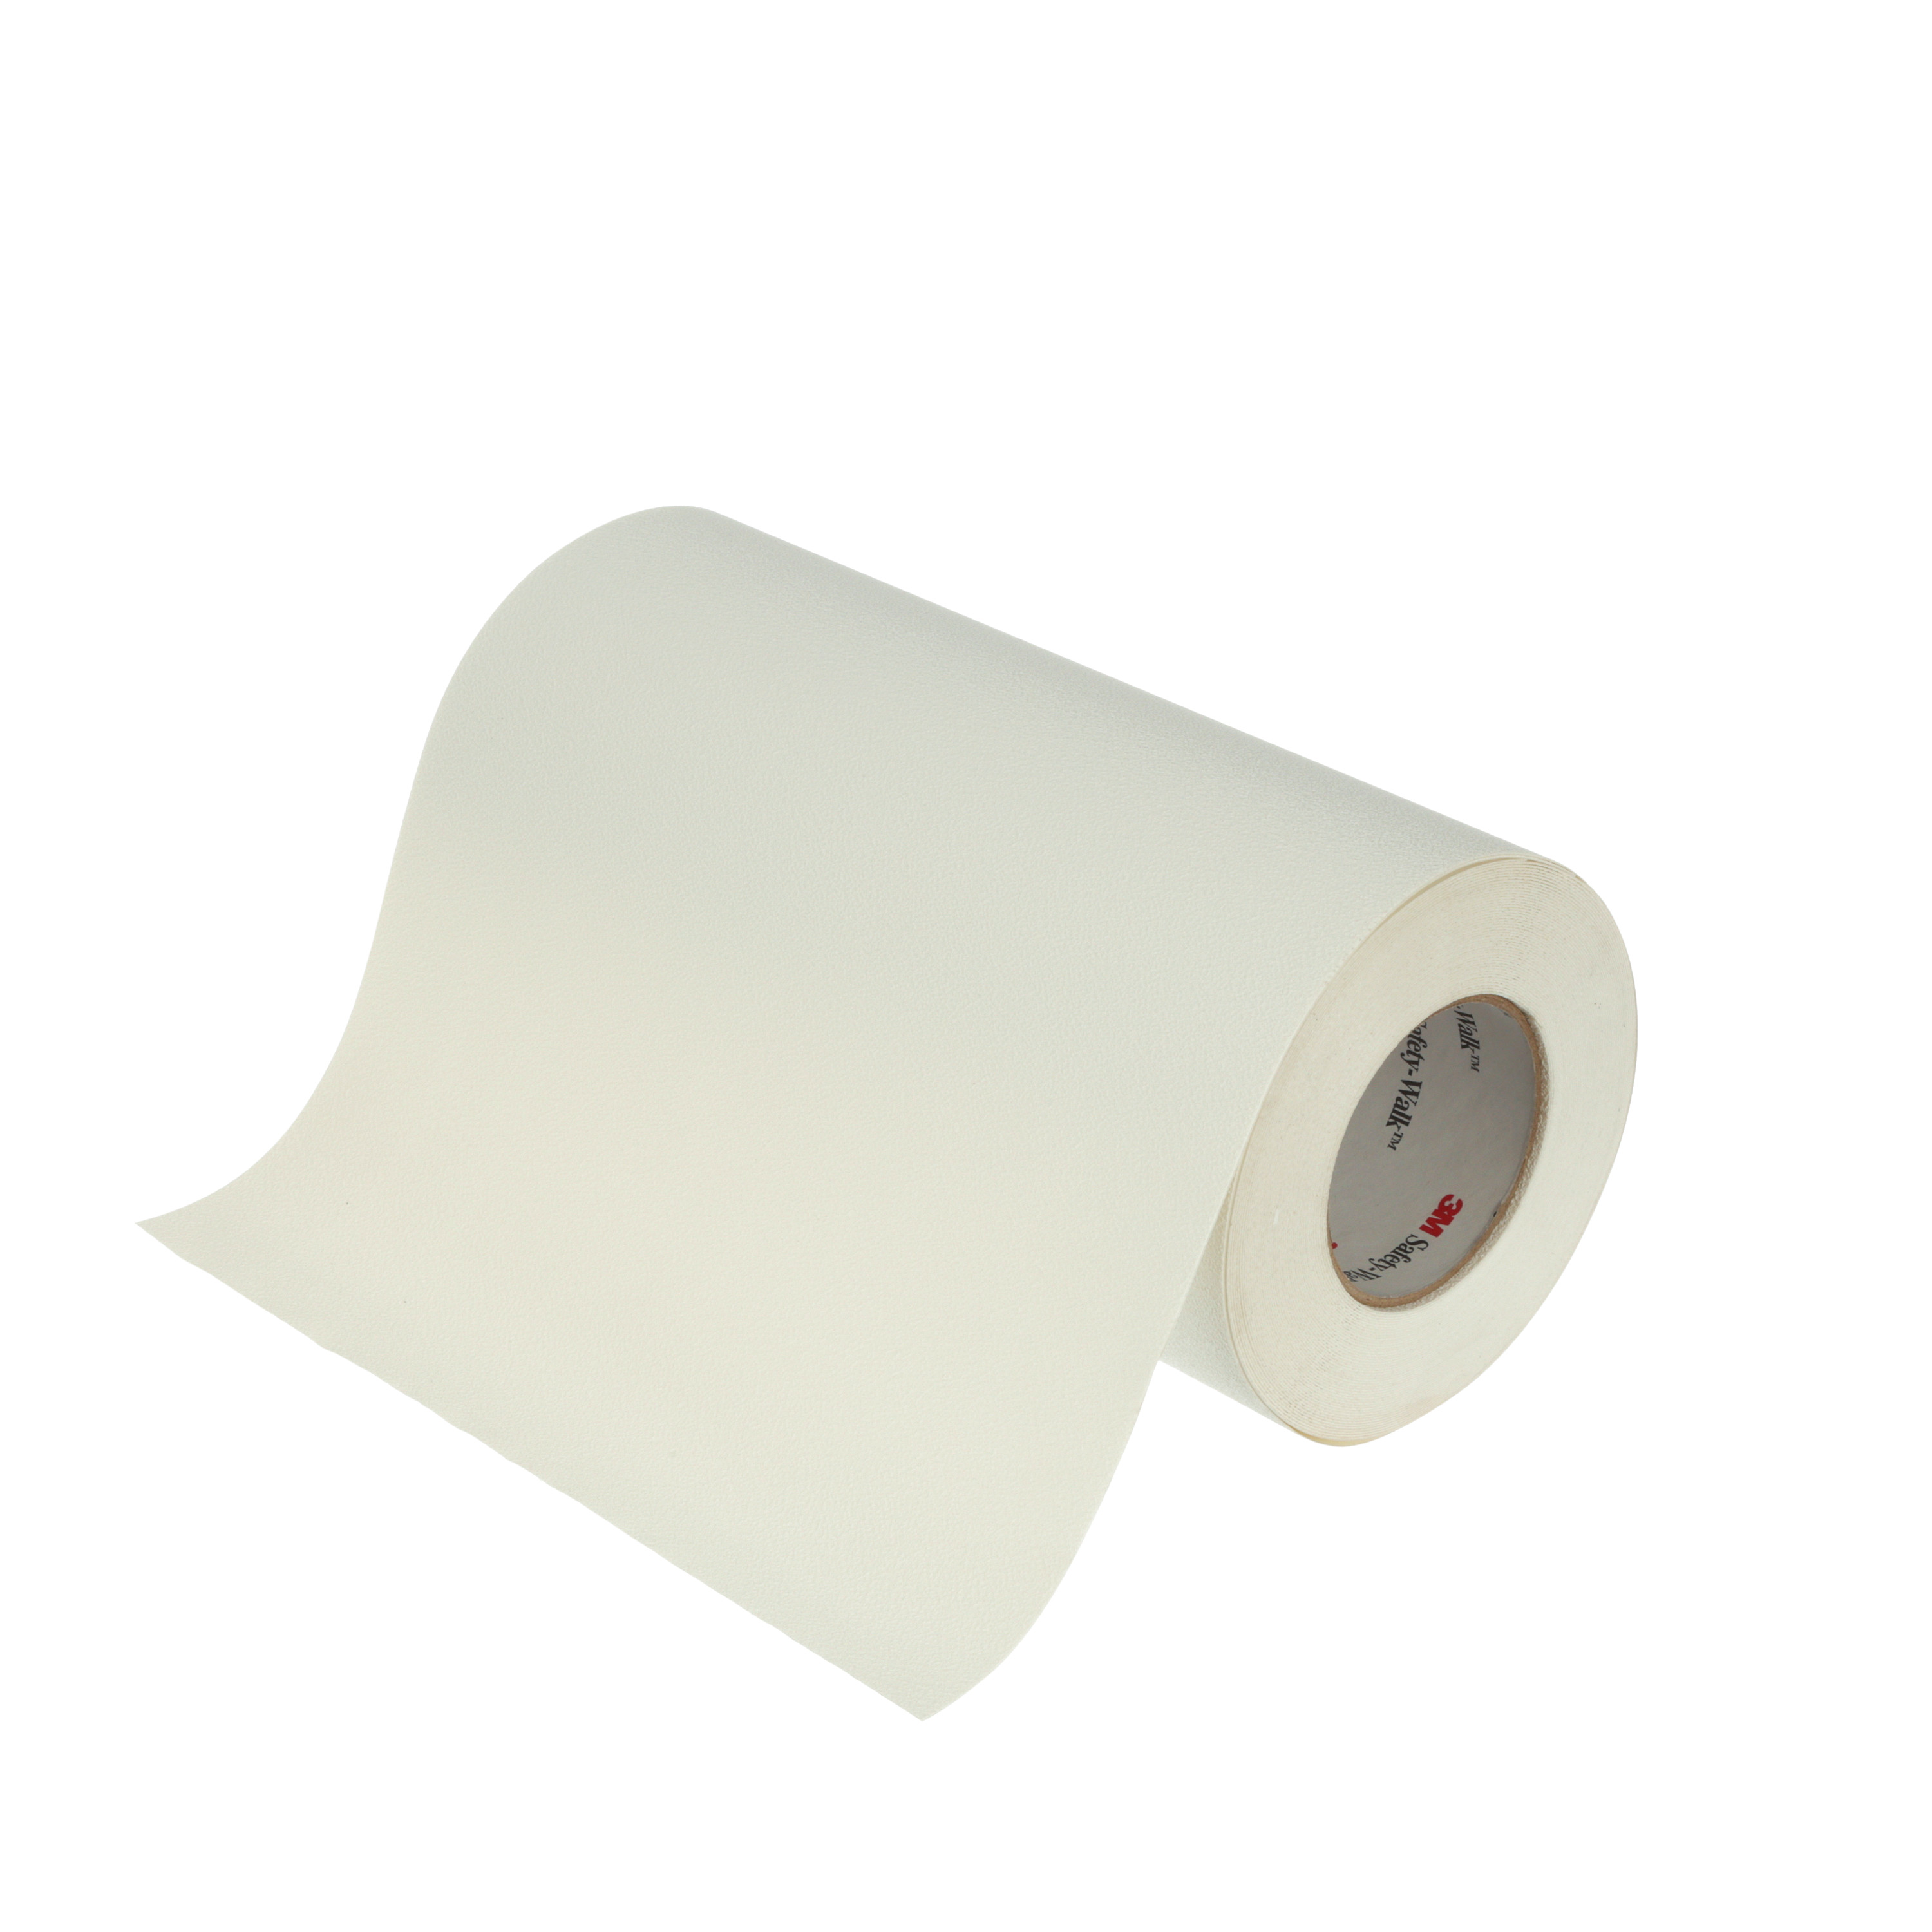 3M™ Safety-Walk™ Slip-Resistant Fine Resilient Tapes & Treads 280,
White, 1 inch Wide & Over, Configurable Roll